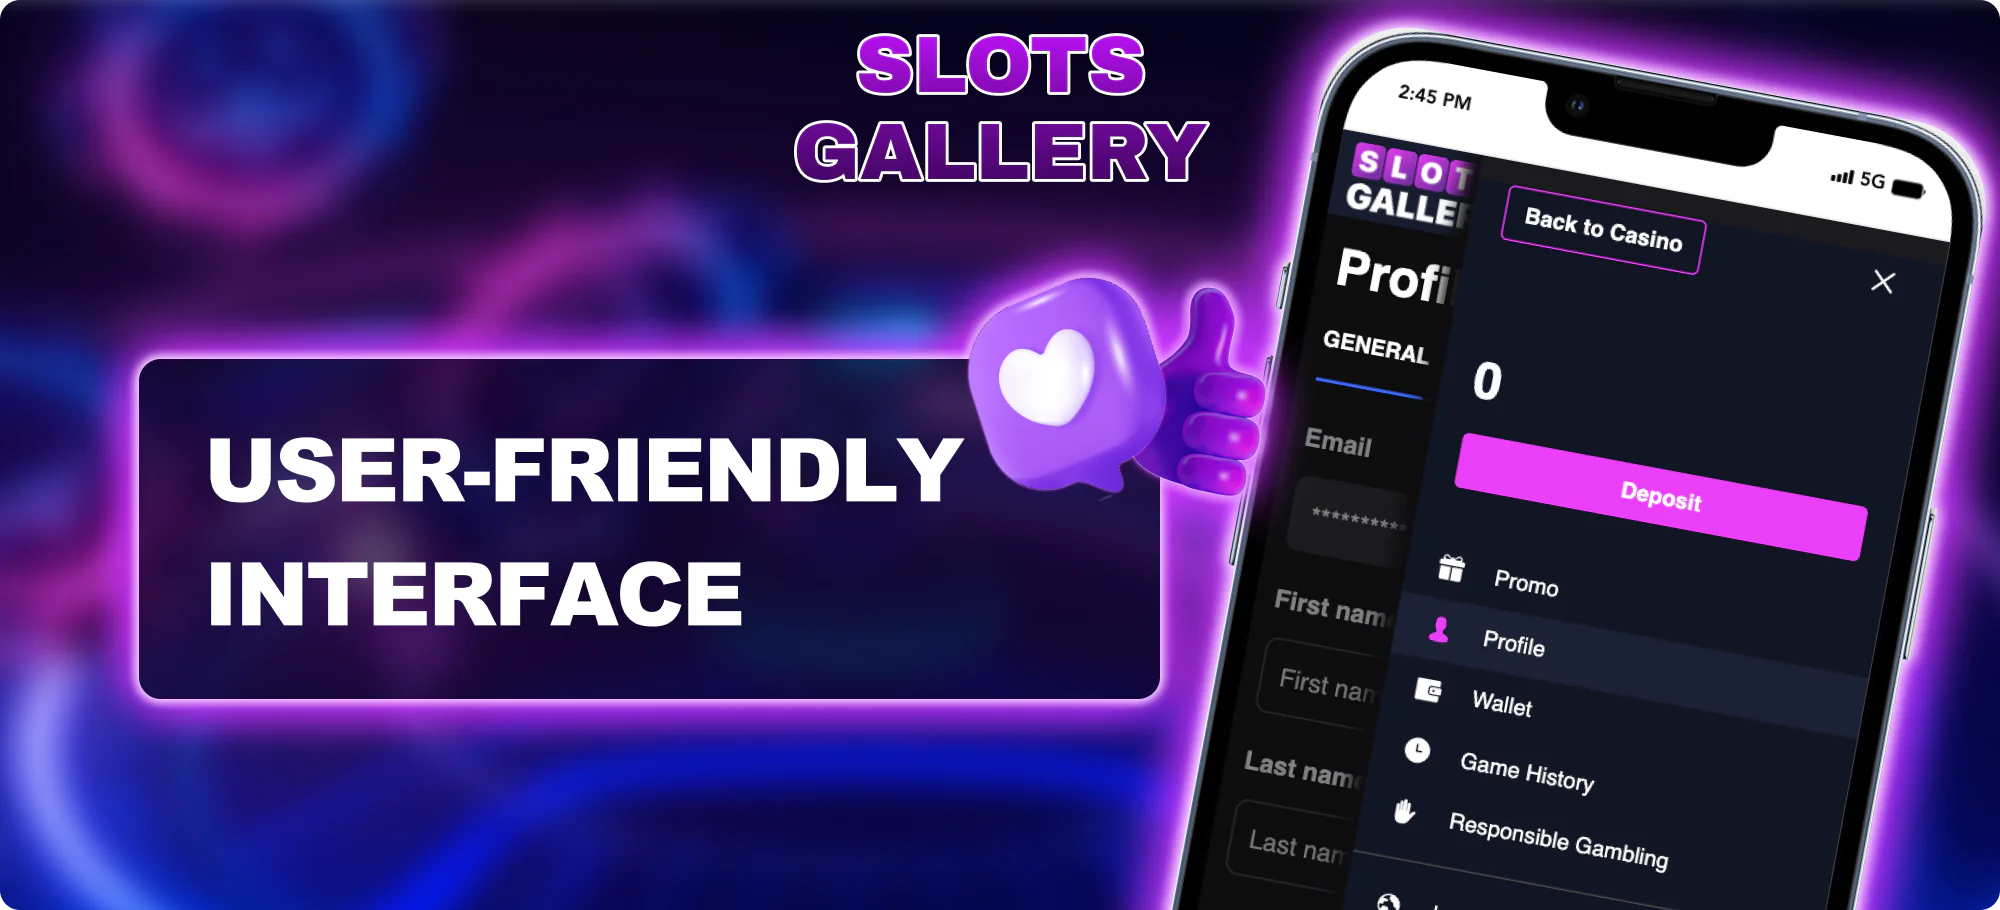 User friendly interface for Slots Gallery Players in the App